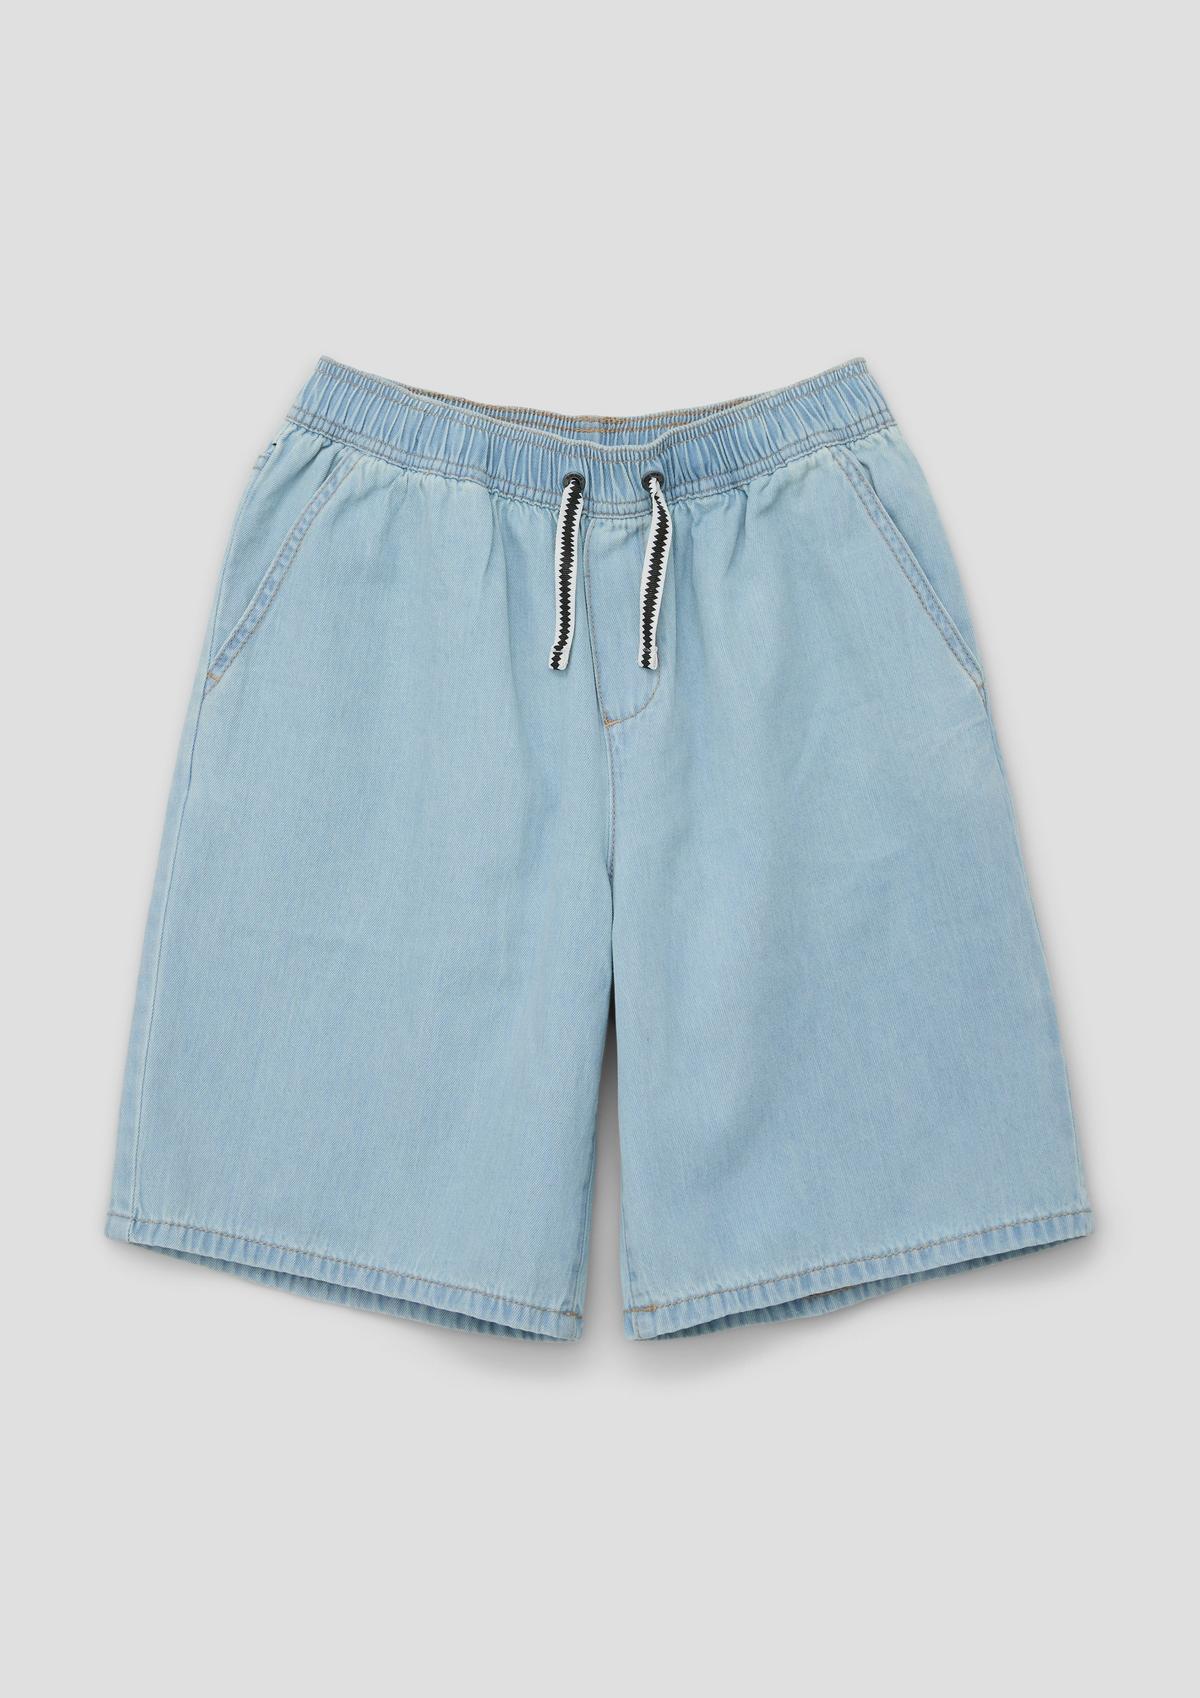 s.Oliver Denim Bermudas / relaxed fit / mid rise